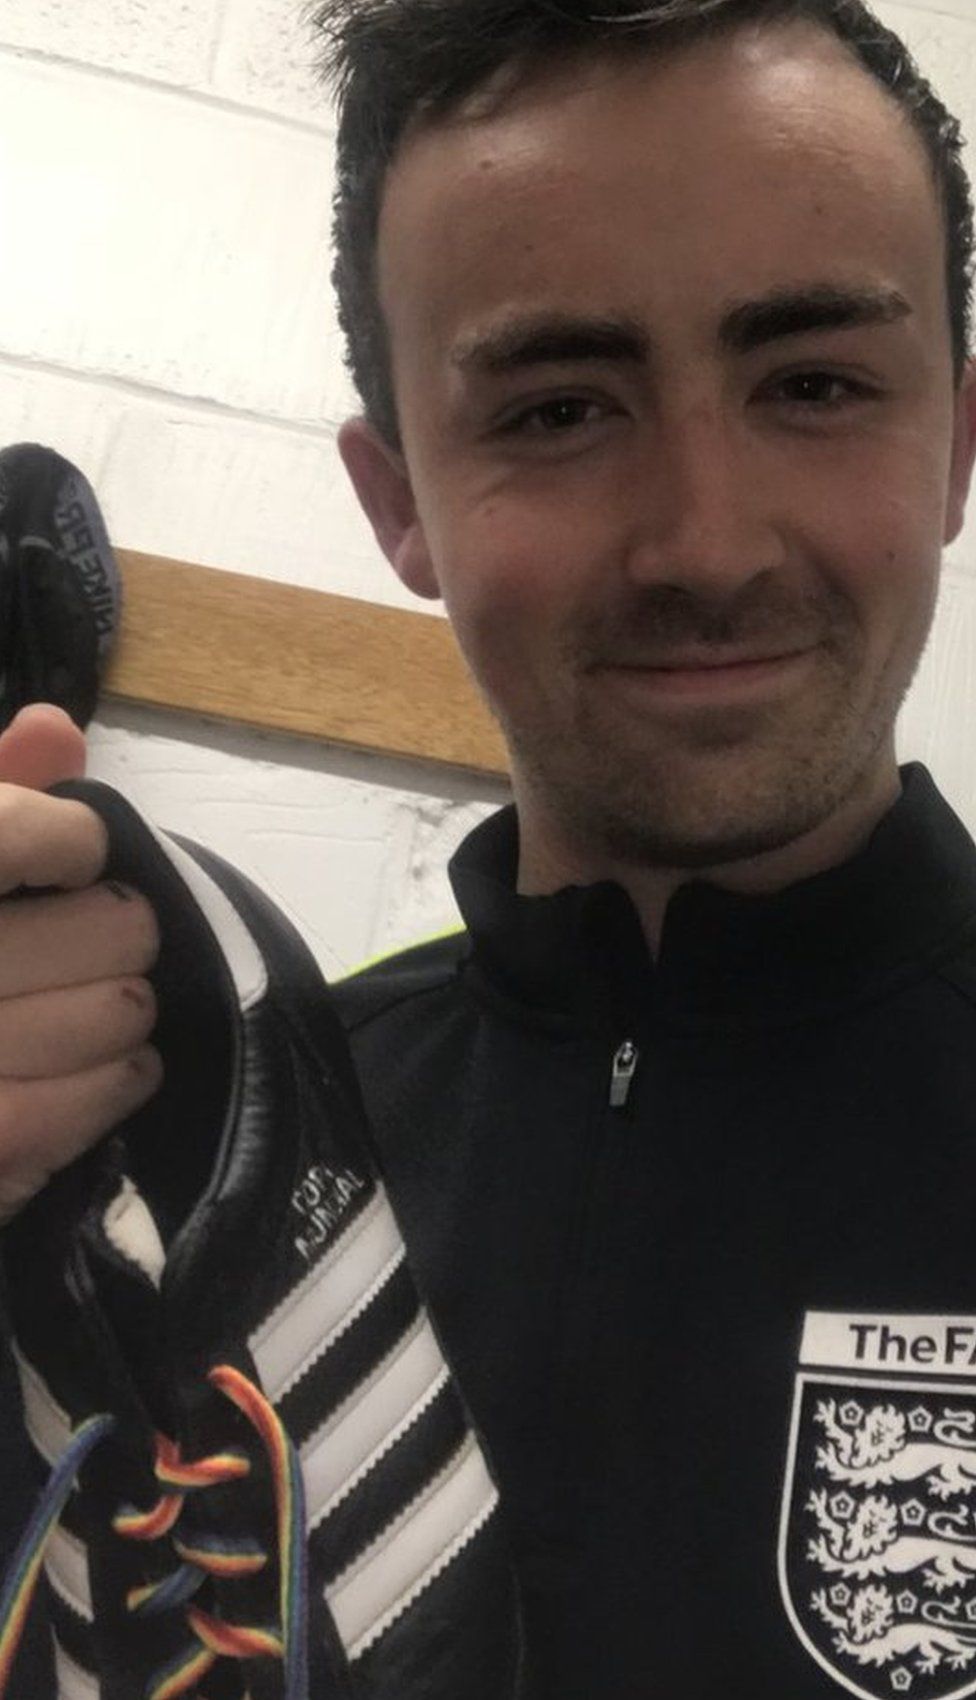 Referee Jackk Oxenham thinks Rainbow Laces helps football fans who might privately be struggling to come out